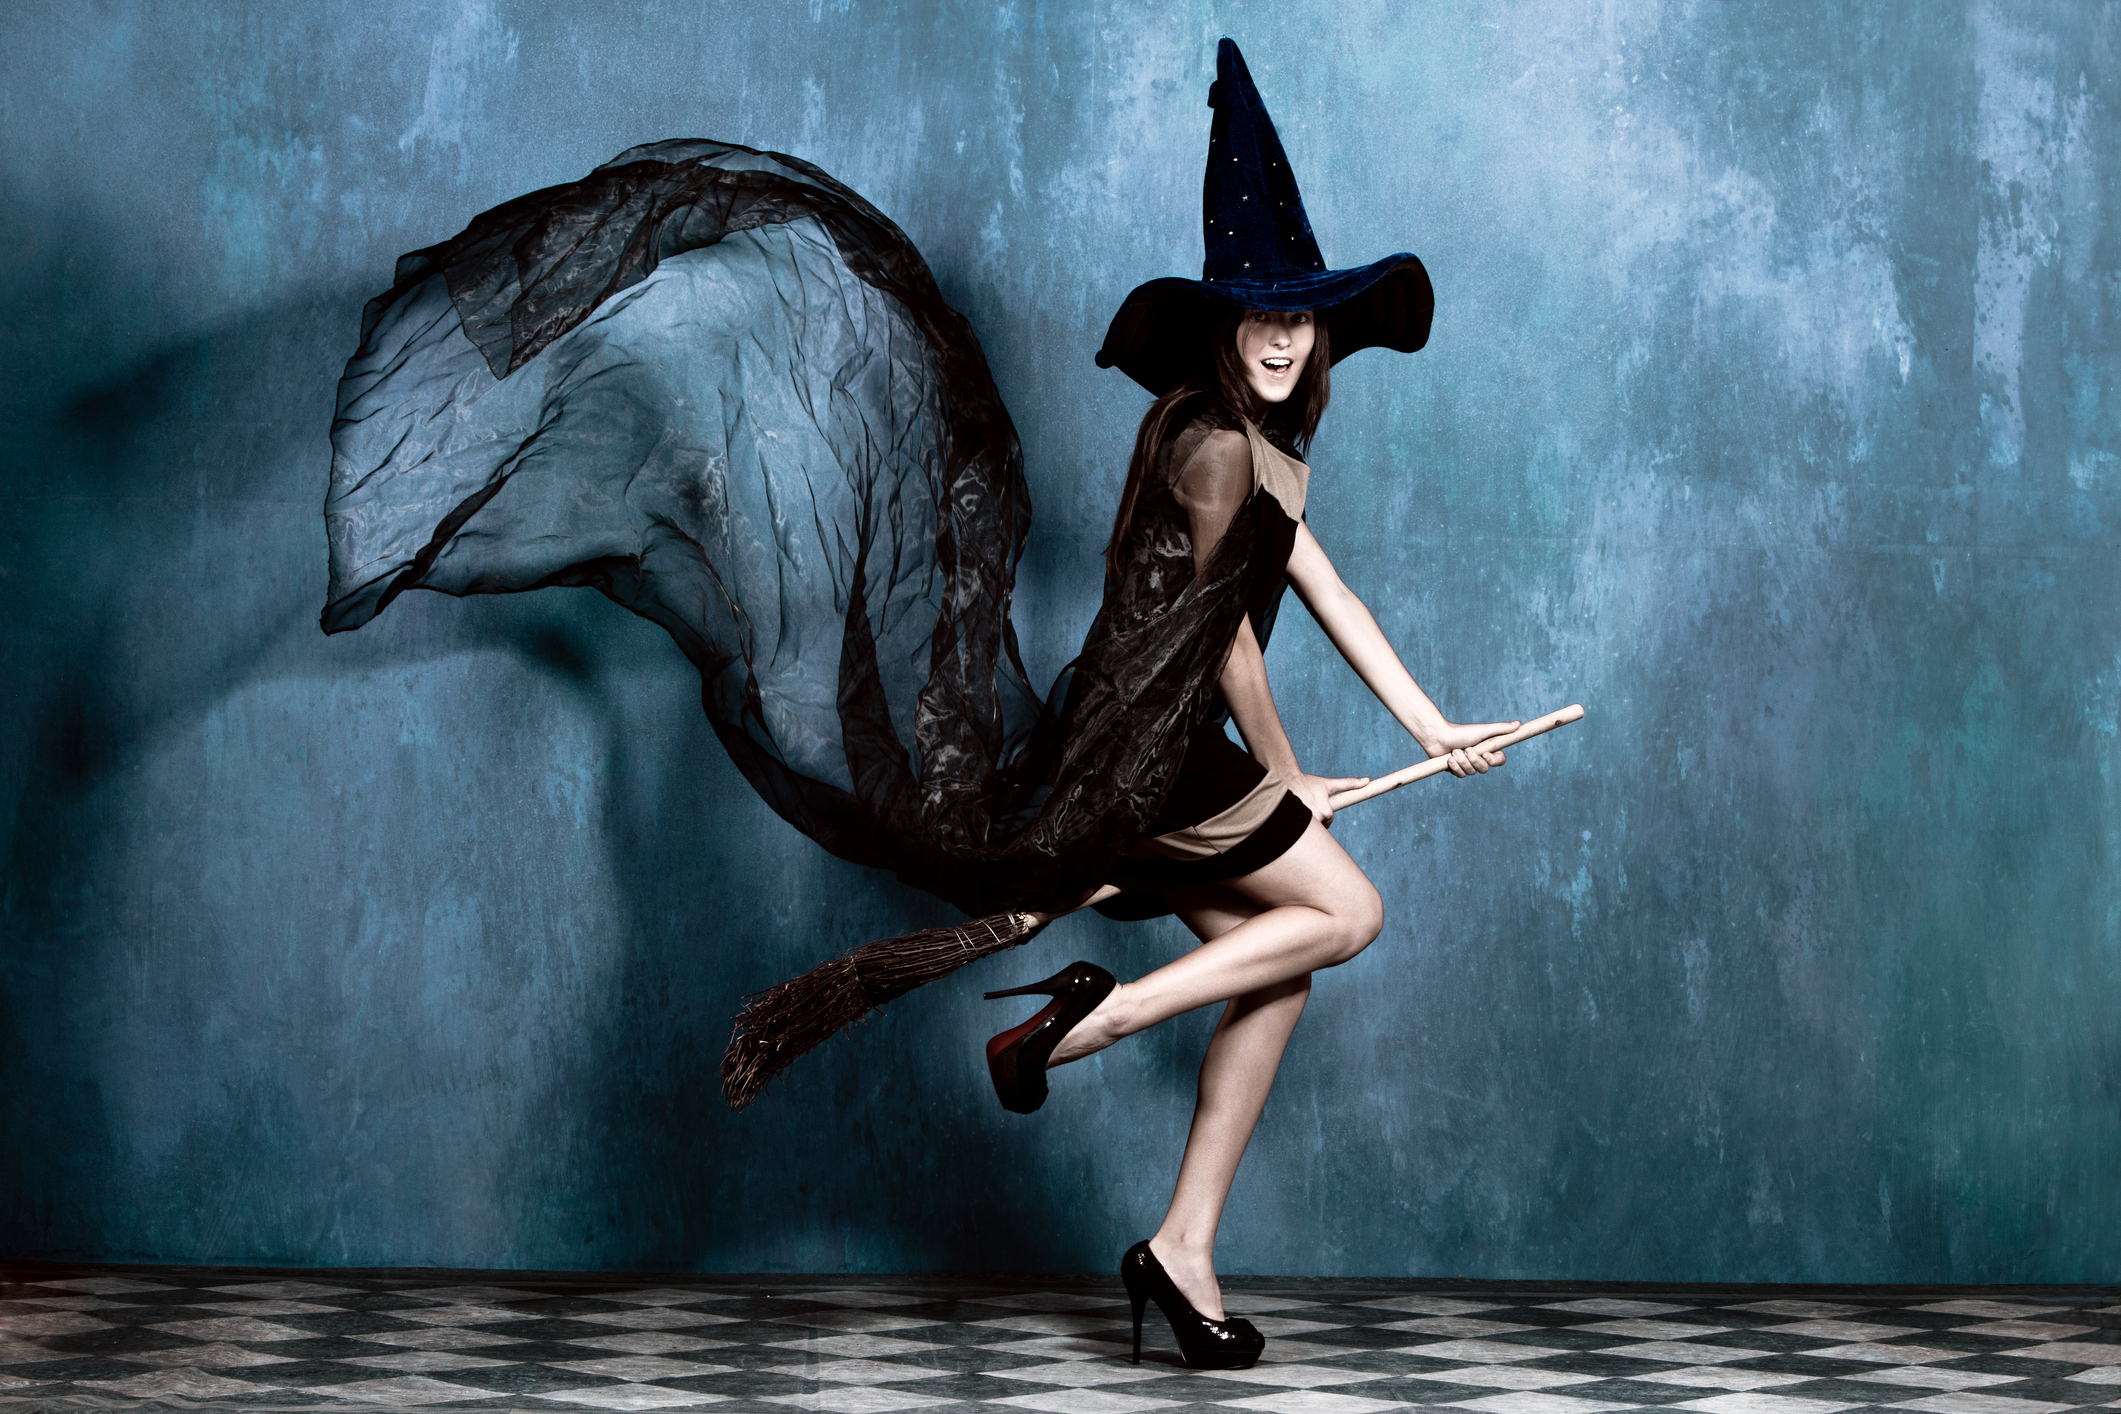 Generic photo of woman in witch costume on a brookstick (Thinkstock/PA)